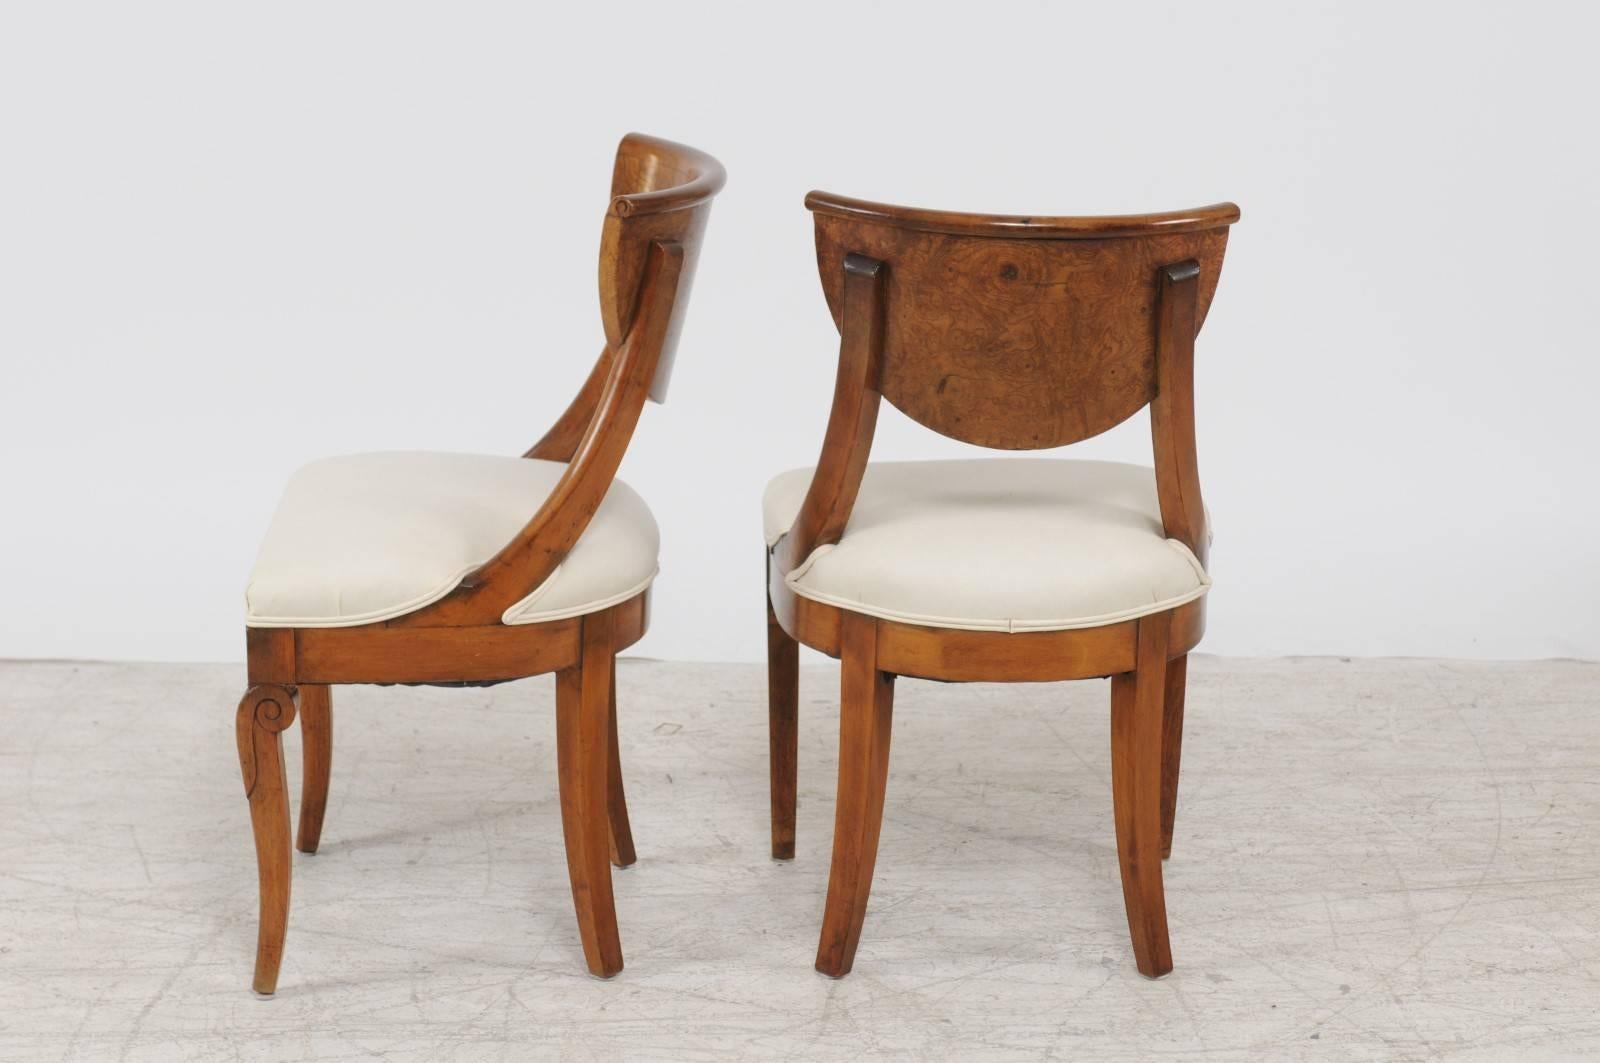 Pair of 1840s Austrian Biedermeier Upholstered Side Chairs with Marquetry Décor 1